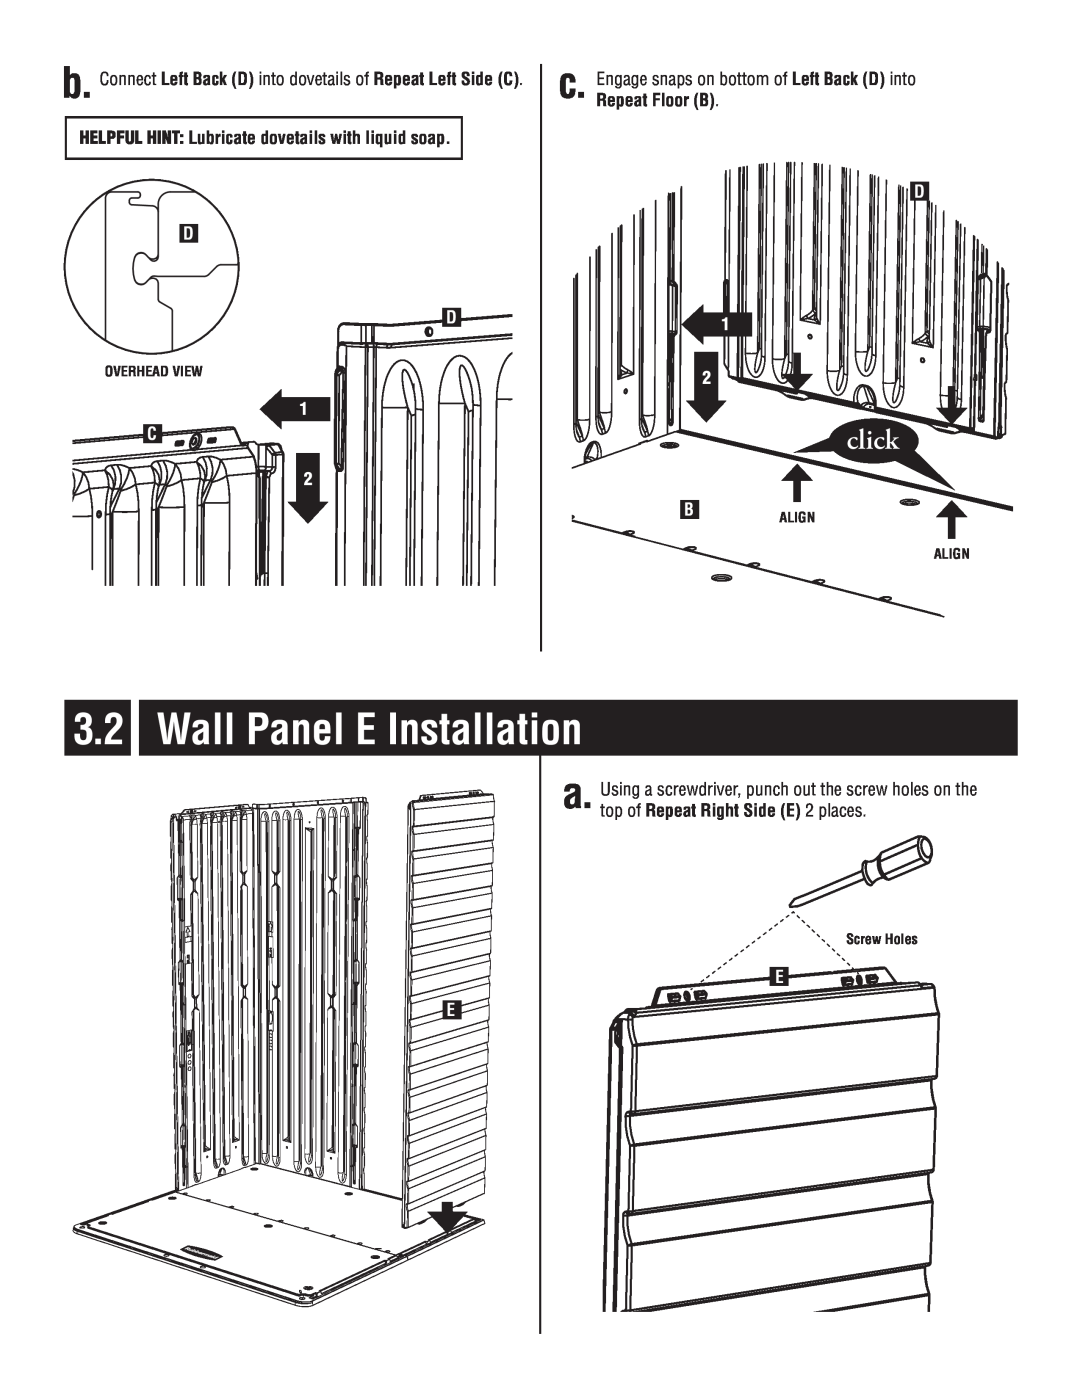 Rubbermaid P0-5L20-P0 Wall Panel E Installation, click, HELPFUL HINT Lubricate dovetails with liquid soap, Overhead View 